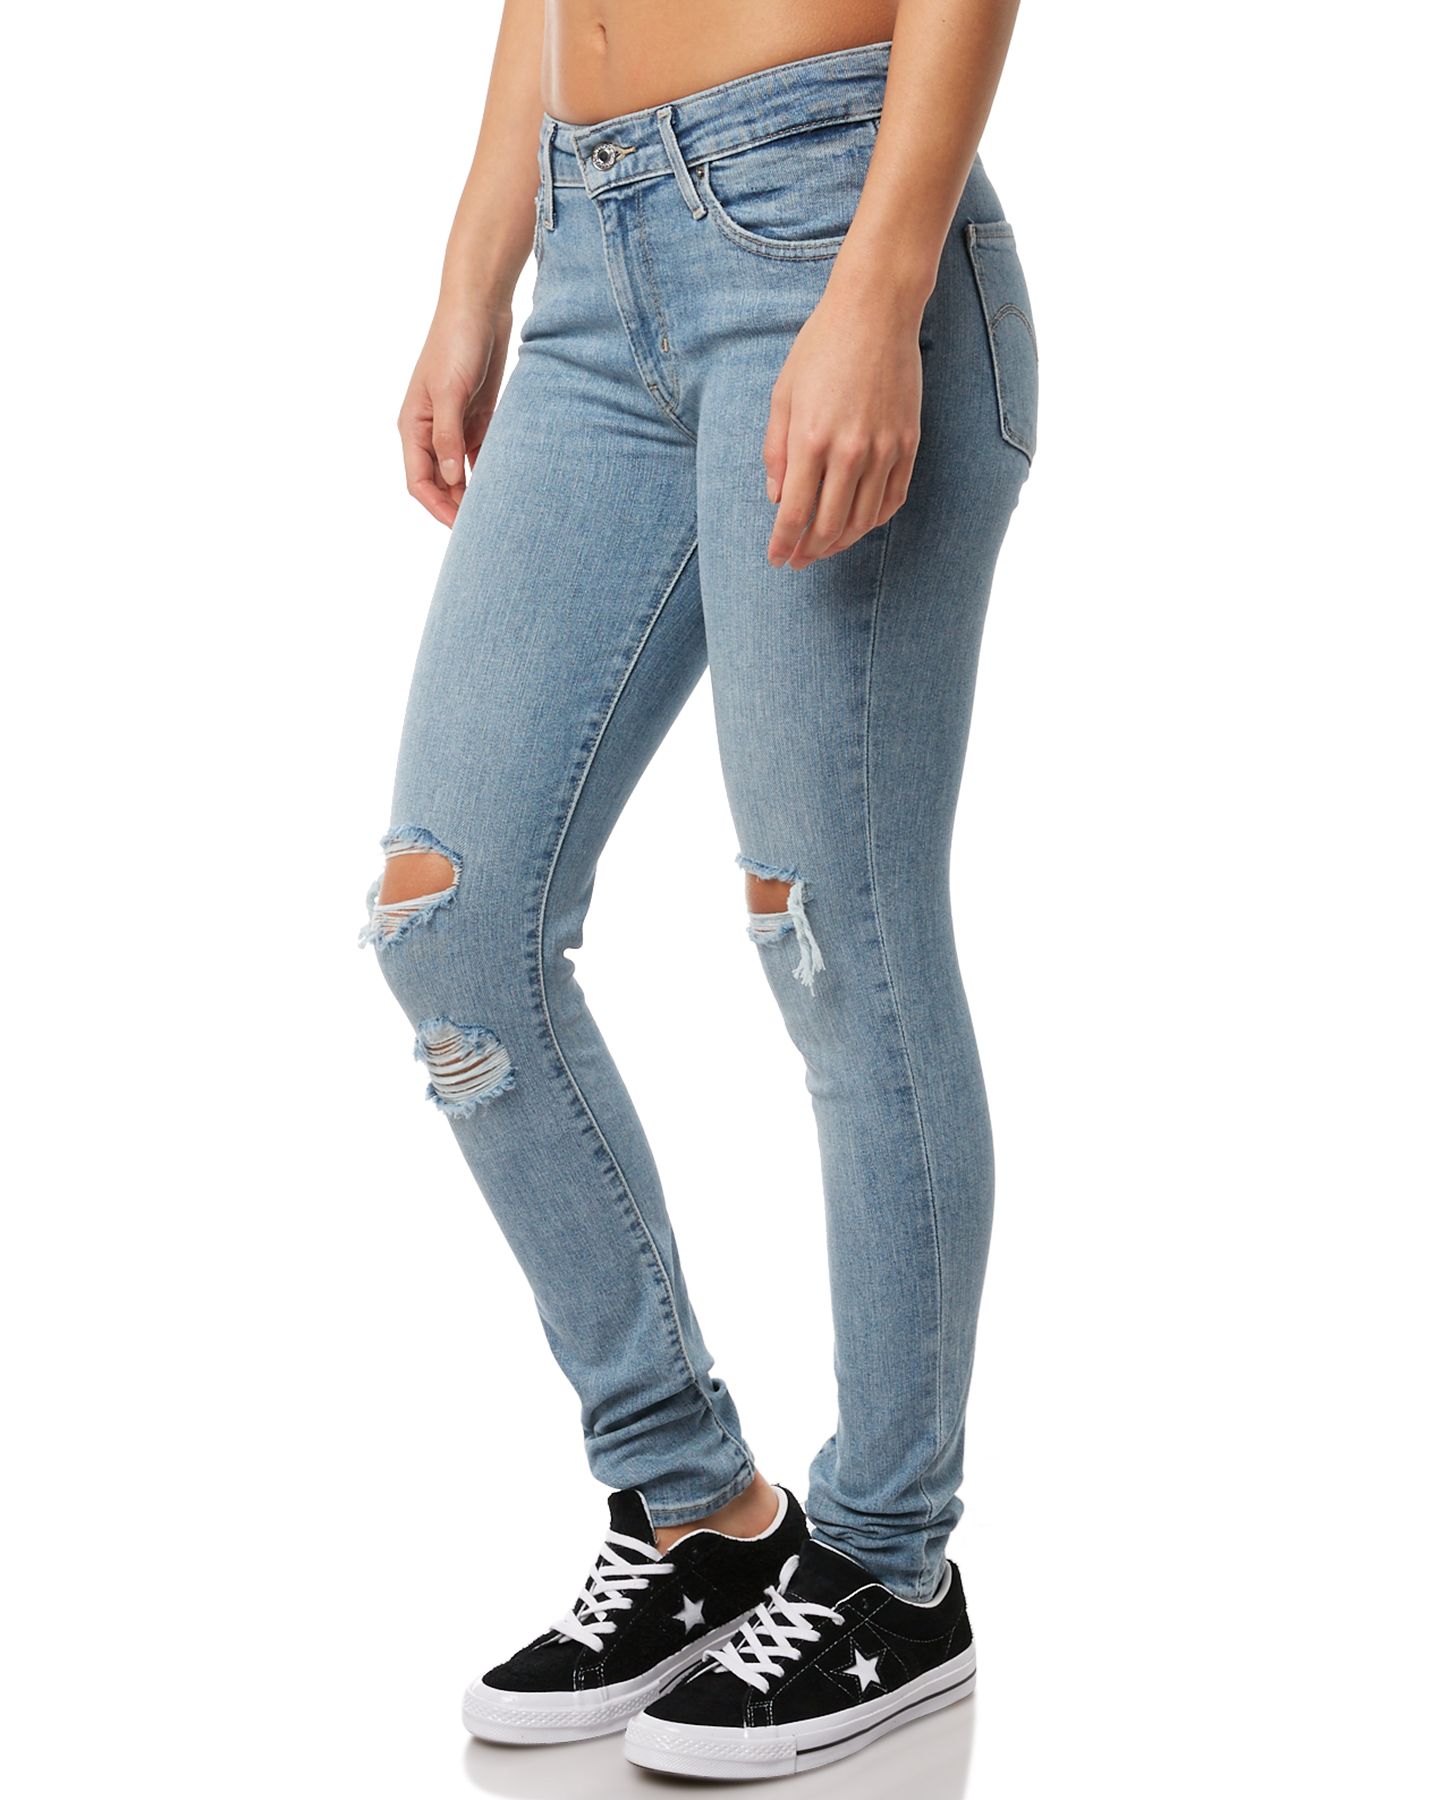 Levis 721 Skinny Womens Jean - Worn And Torn | SurfStitch